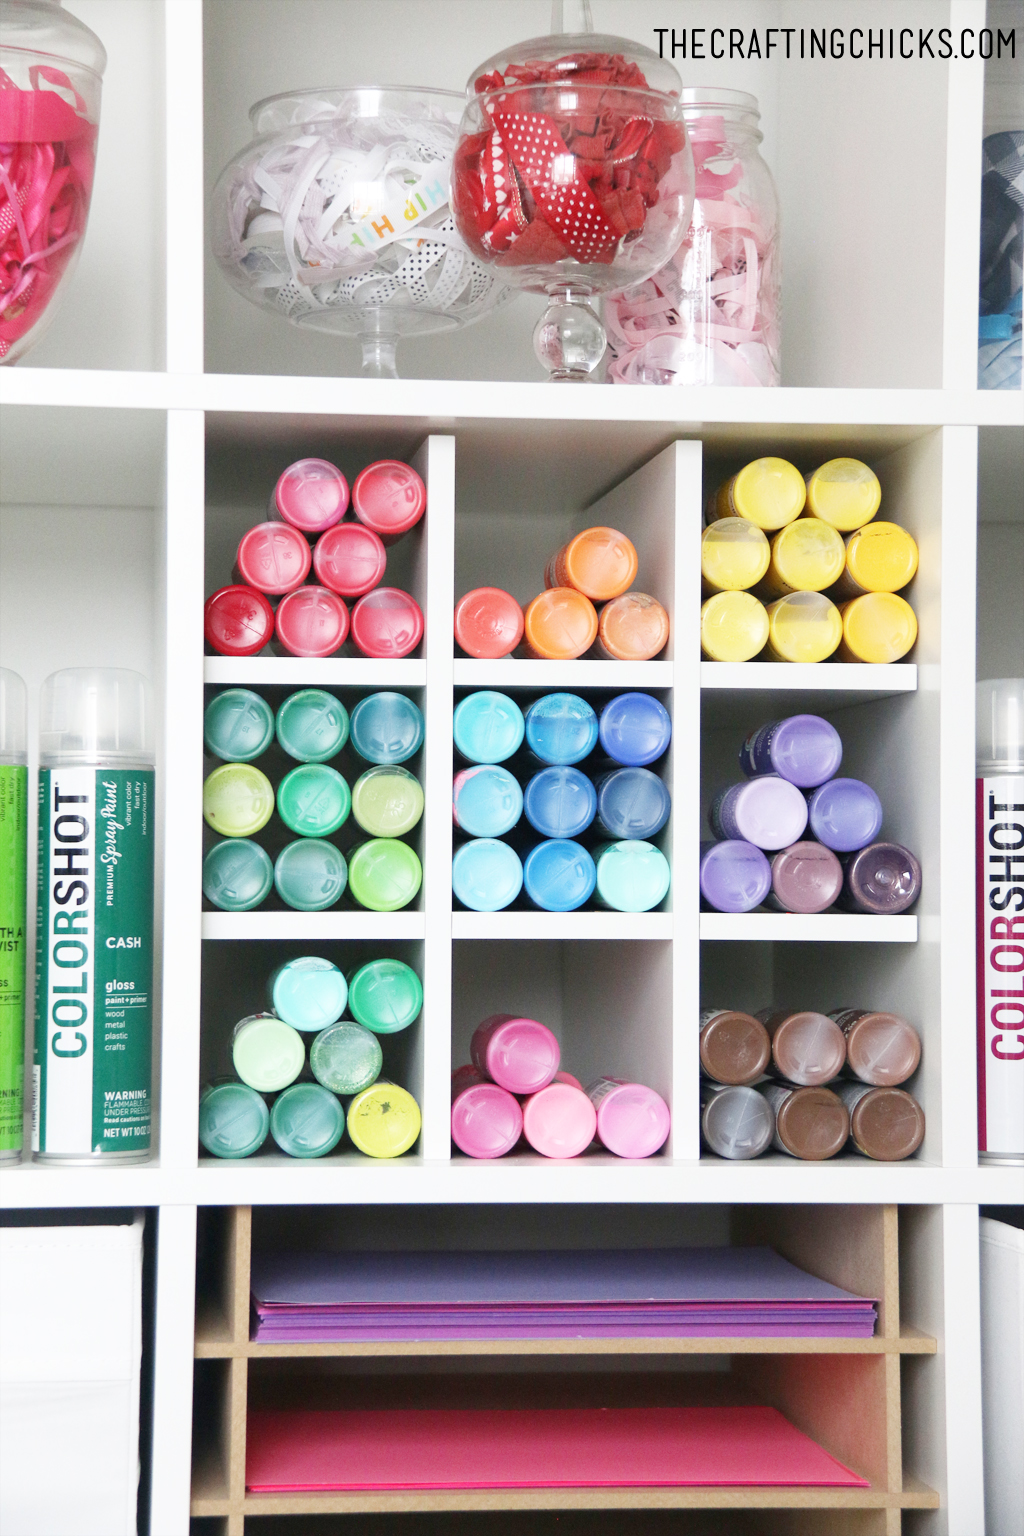 White shelves decorated with colorful jars filled with craft supplies, colorful paper, and colorful paint.